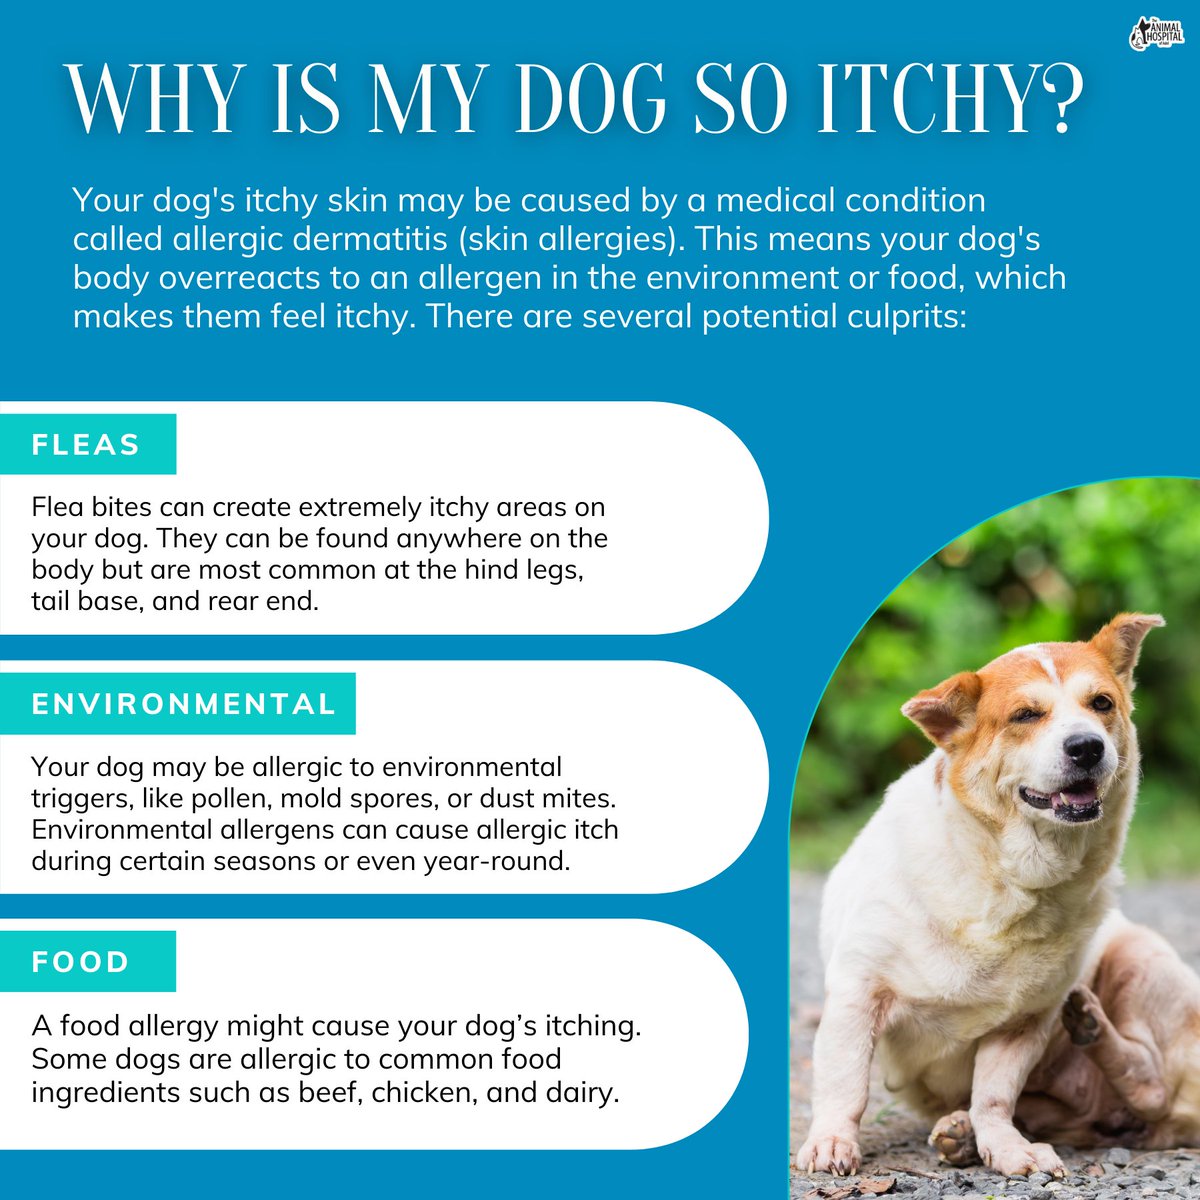 These are a few potential culprits that could be causing your dog to have itchy skin. #DogAllergies #PetDermatology